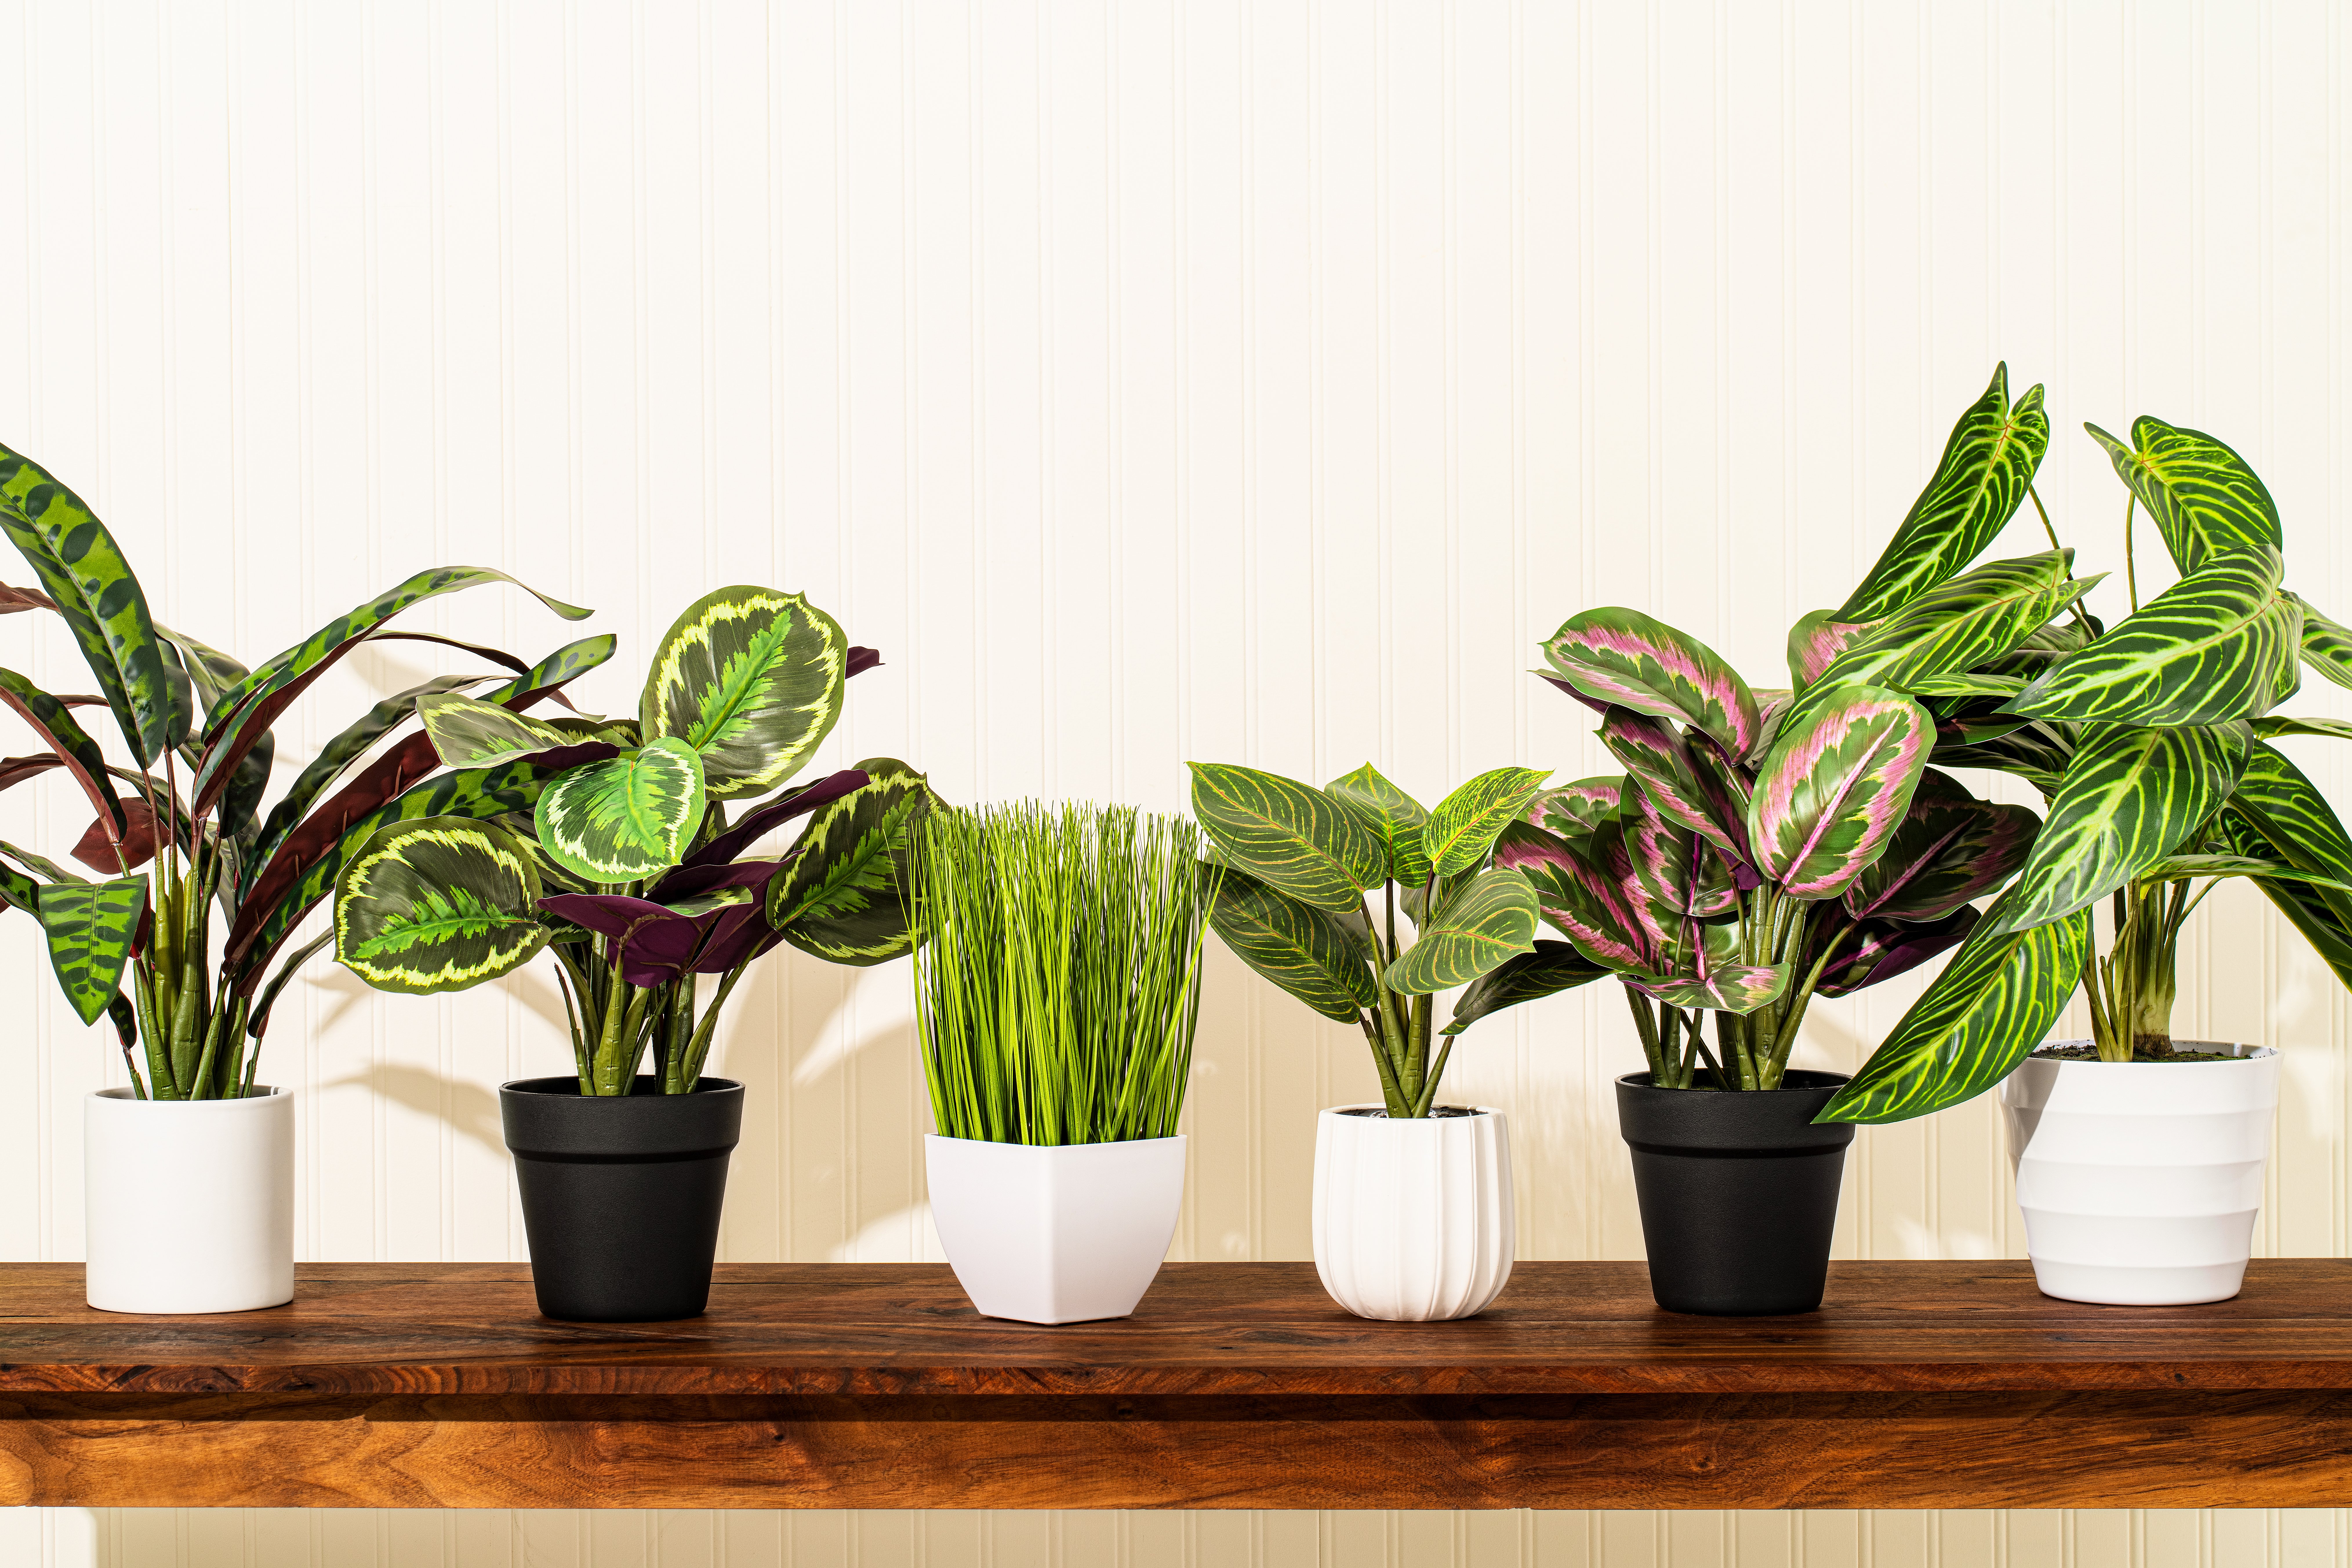 Line of faux potted plants in different pots and vessels against white wall